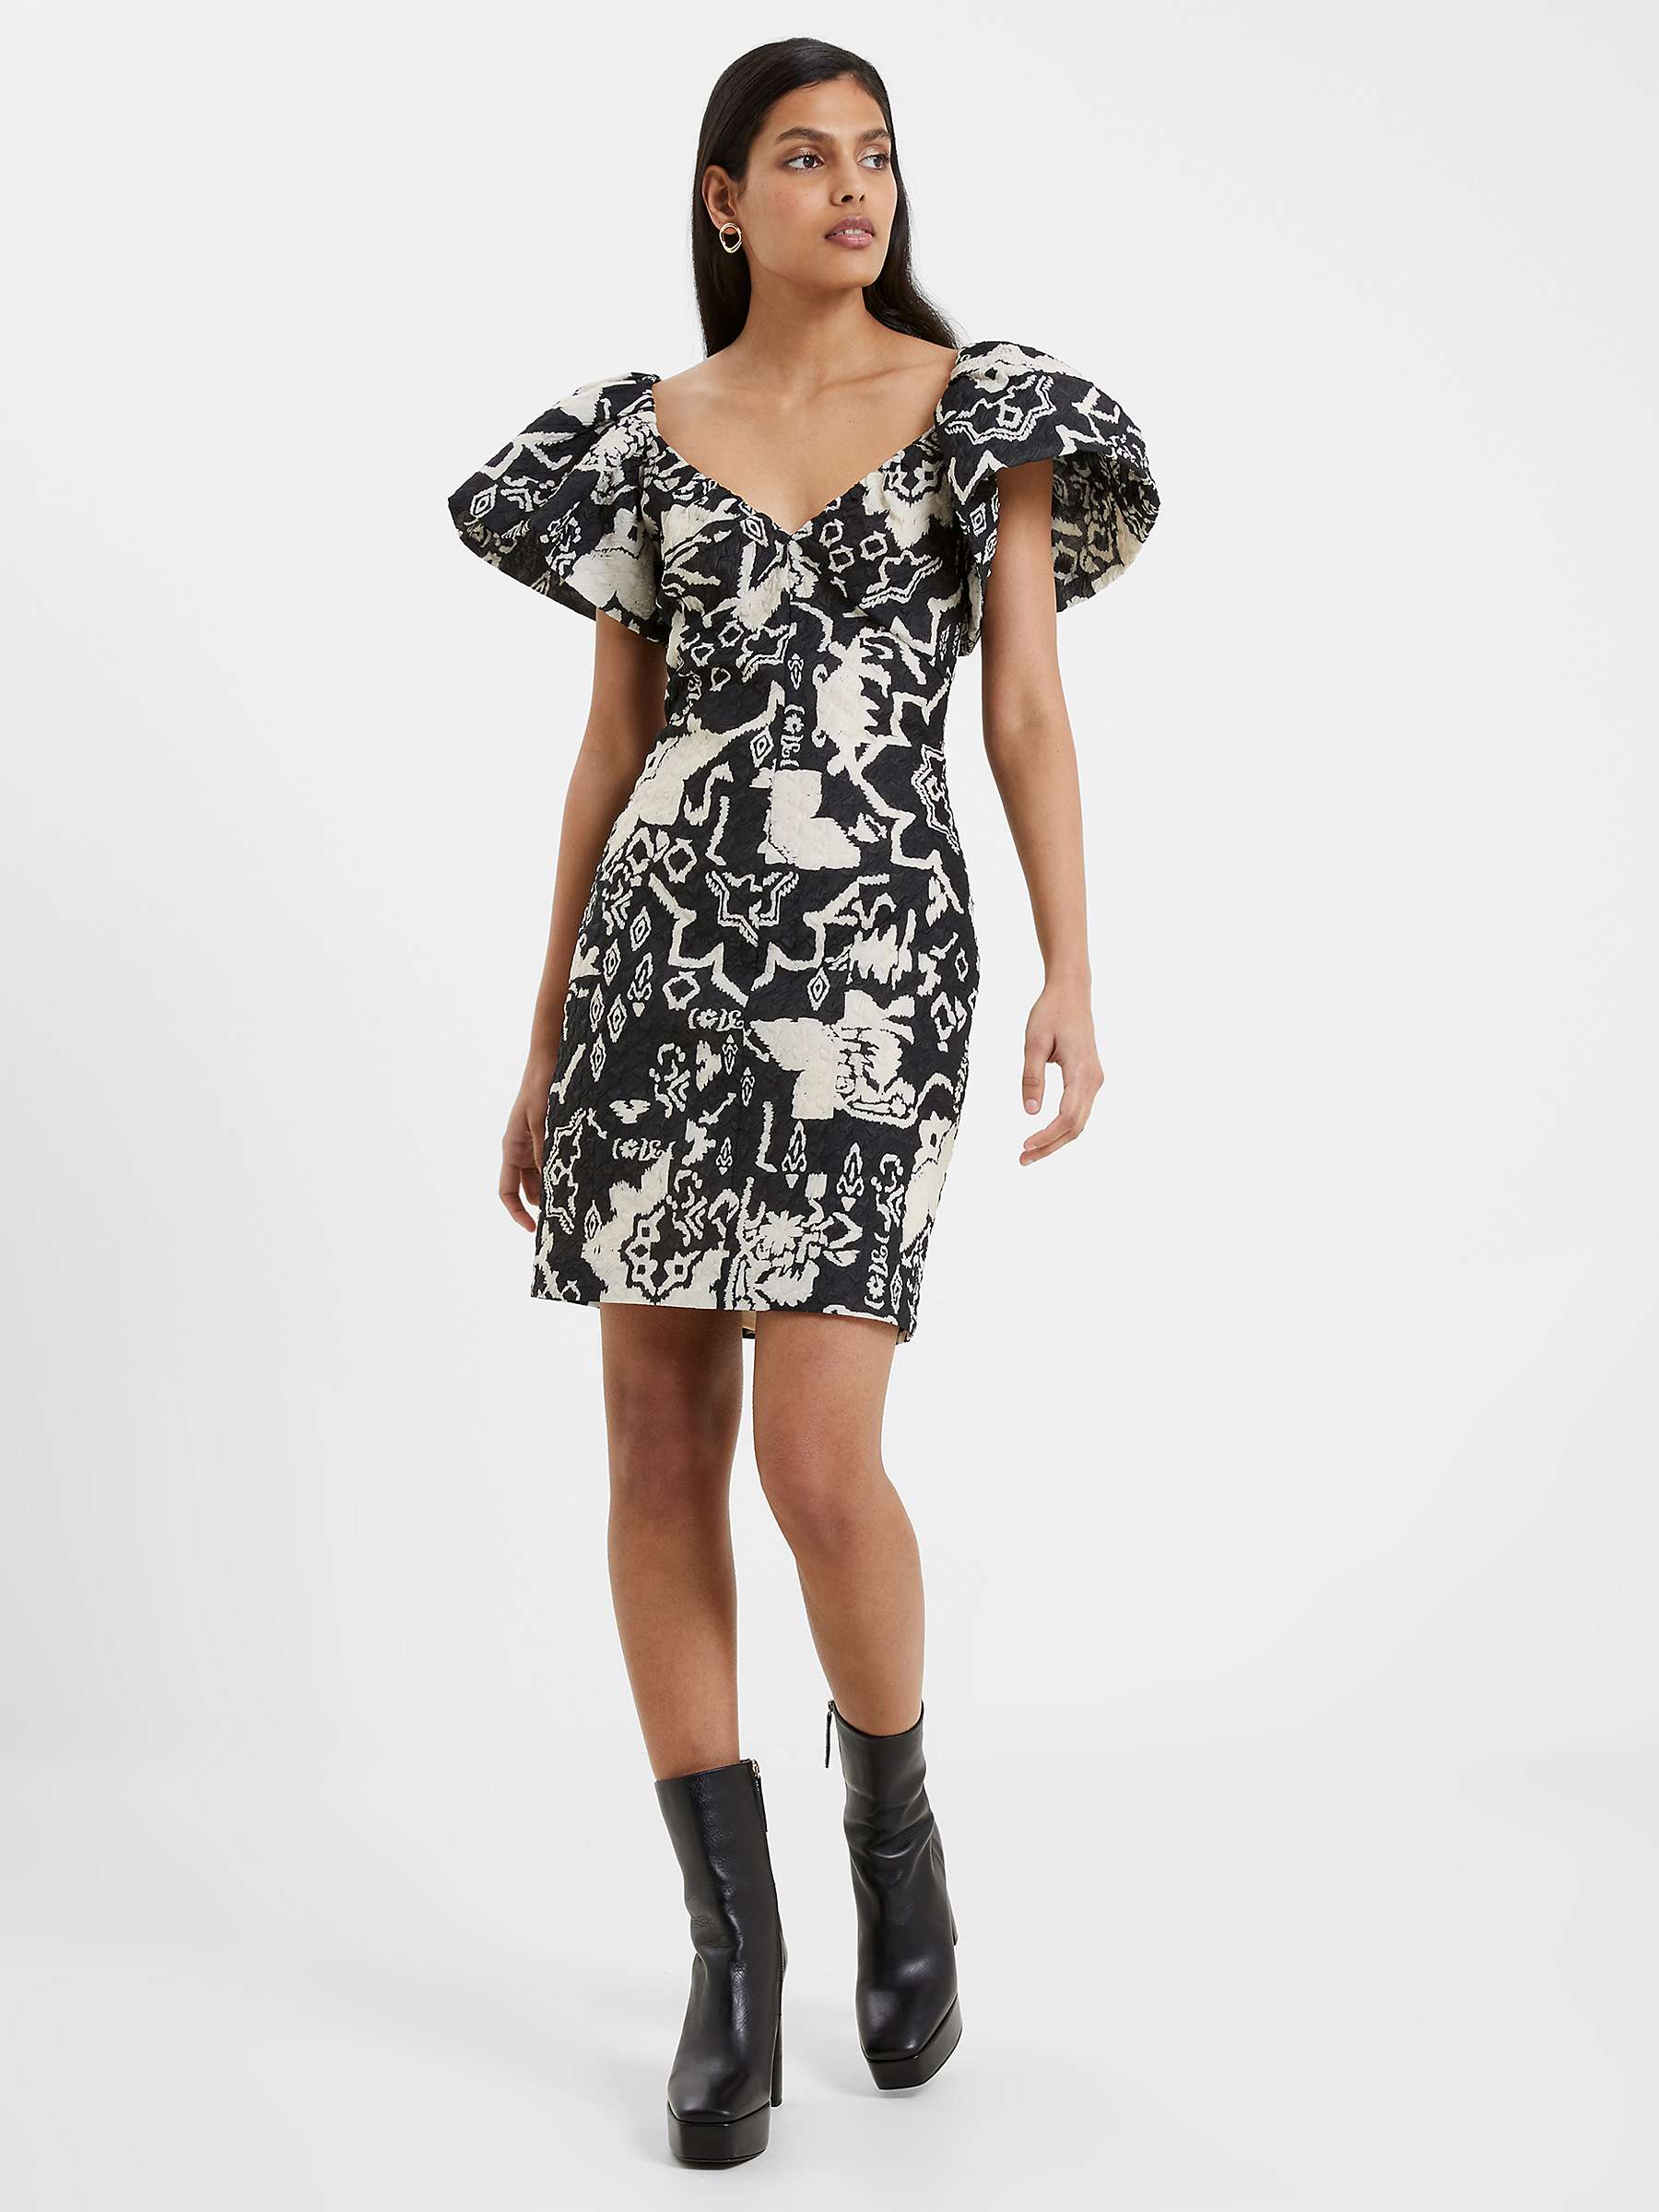 Buy French Connection Deon Candra Jacquard Mini Dress, Black/Cream Online at johnlewis.com